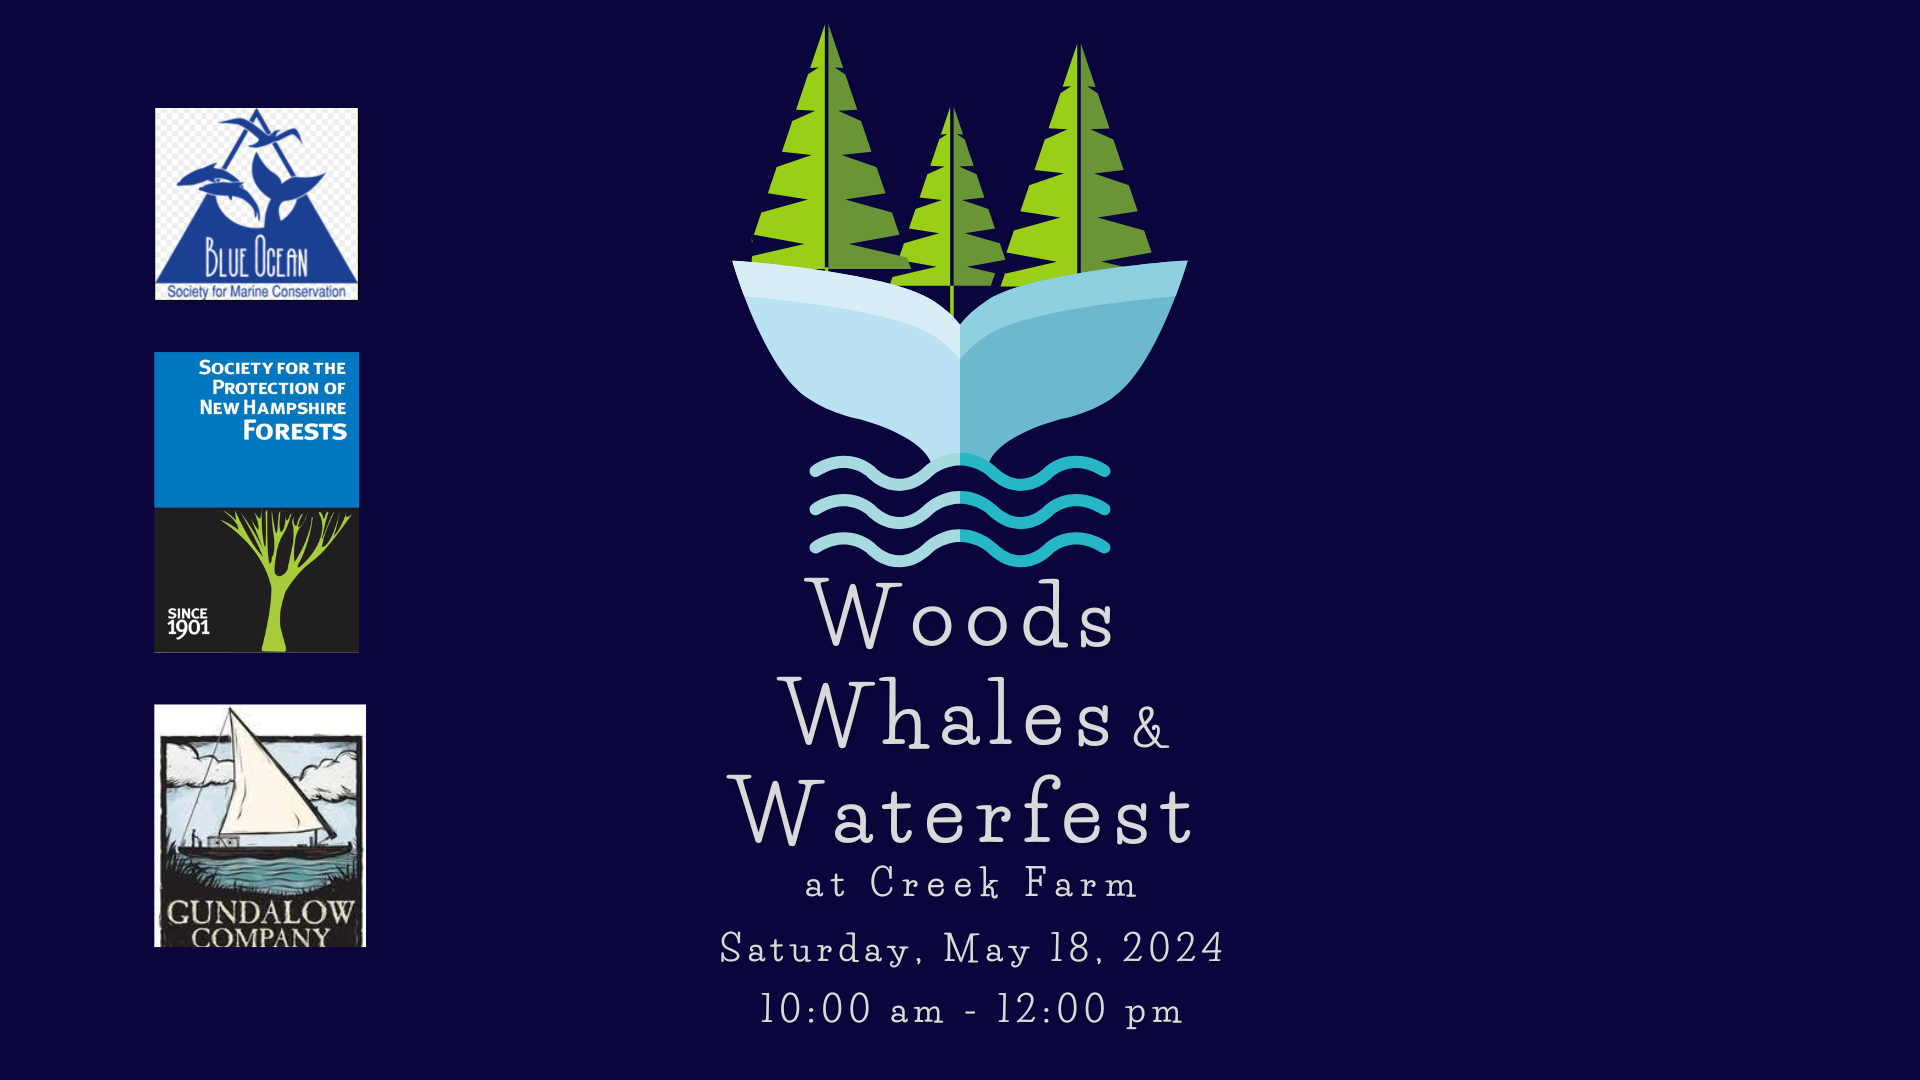 A whale tale with trees on top is the logo for the festival.